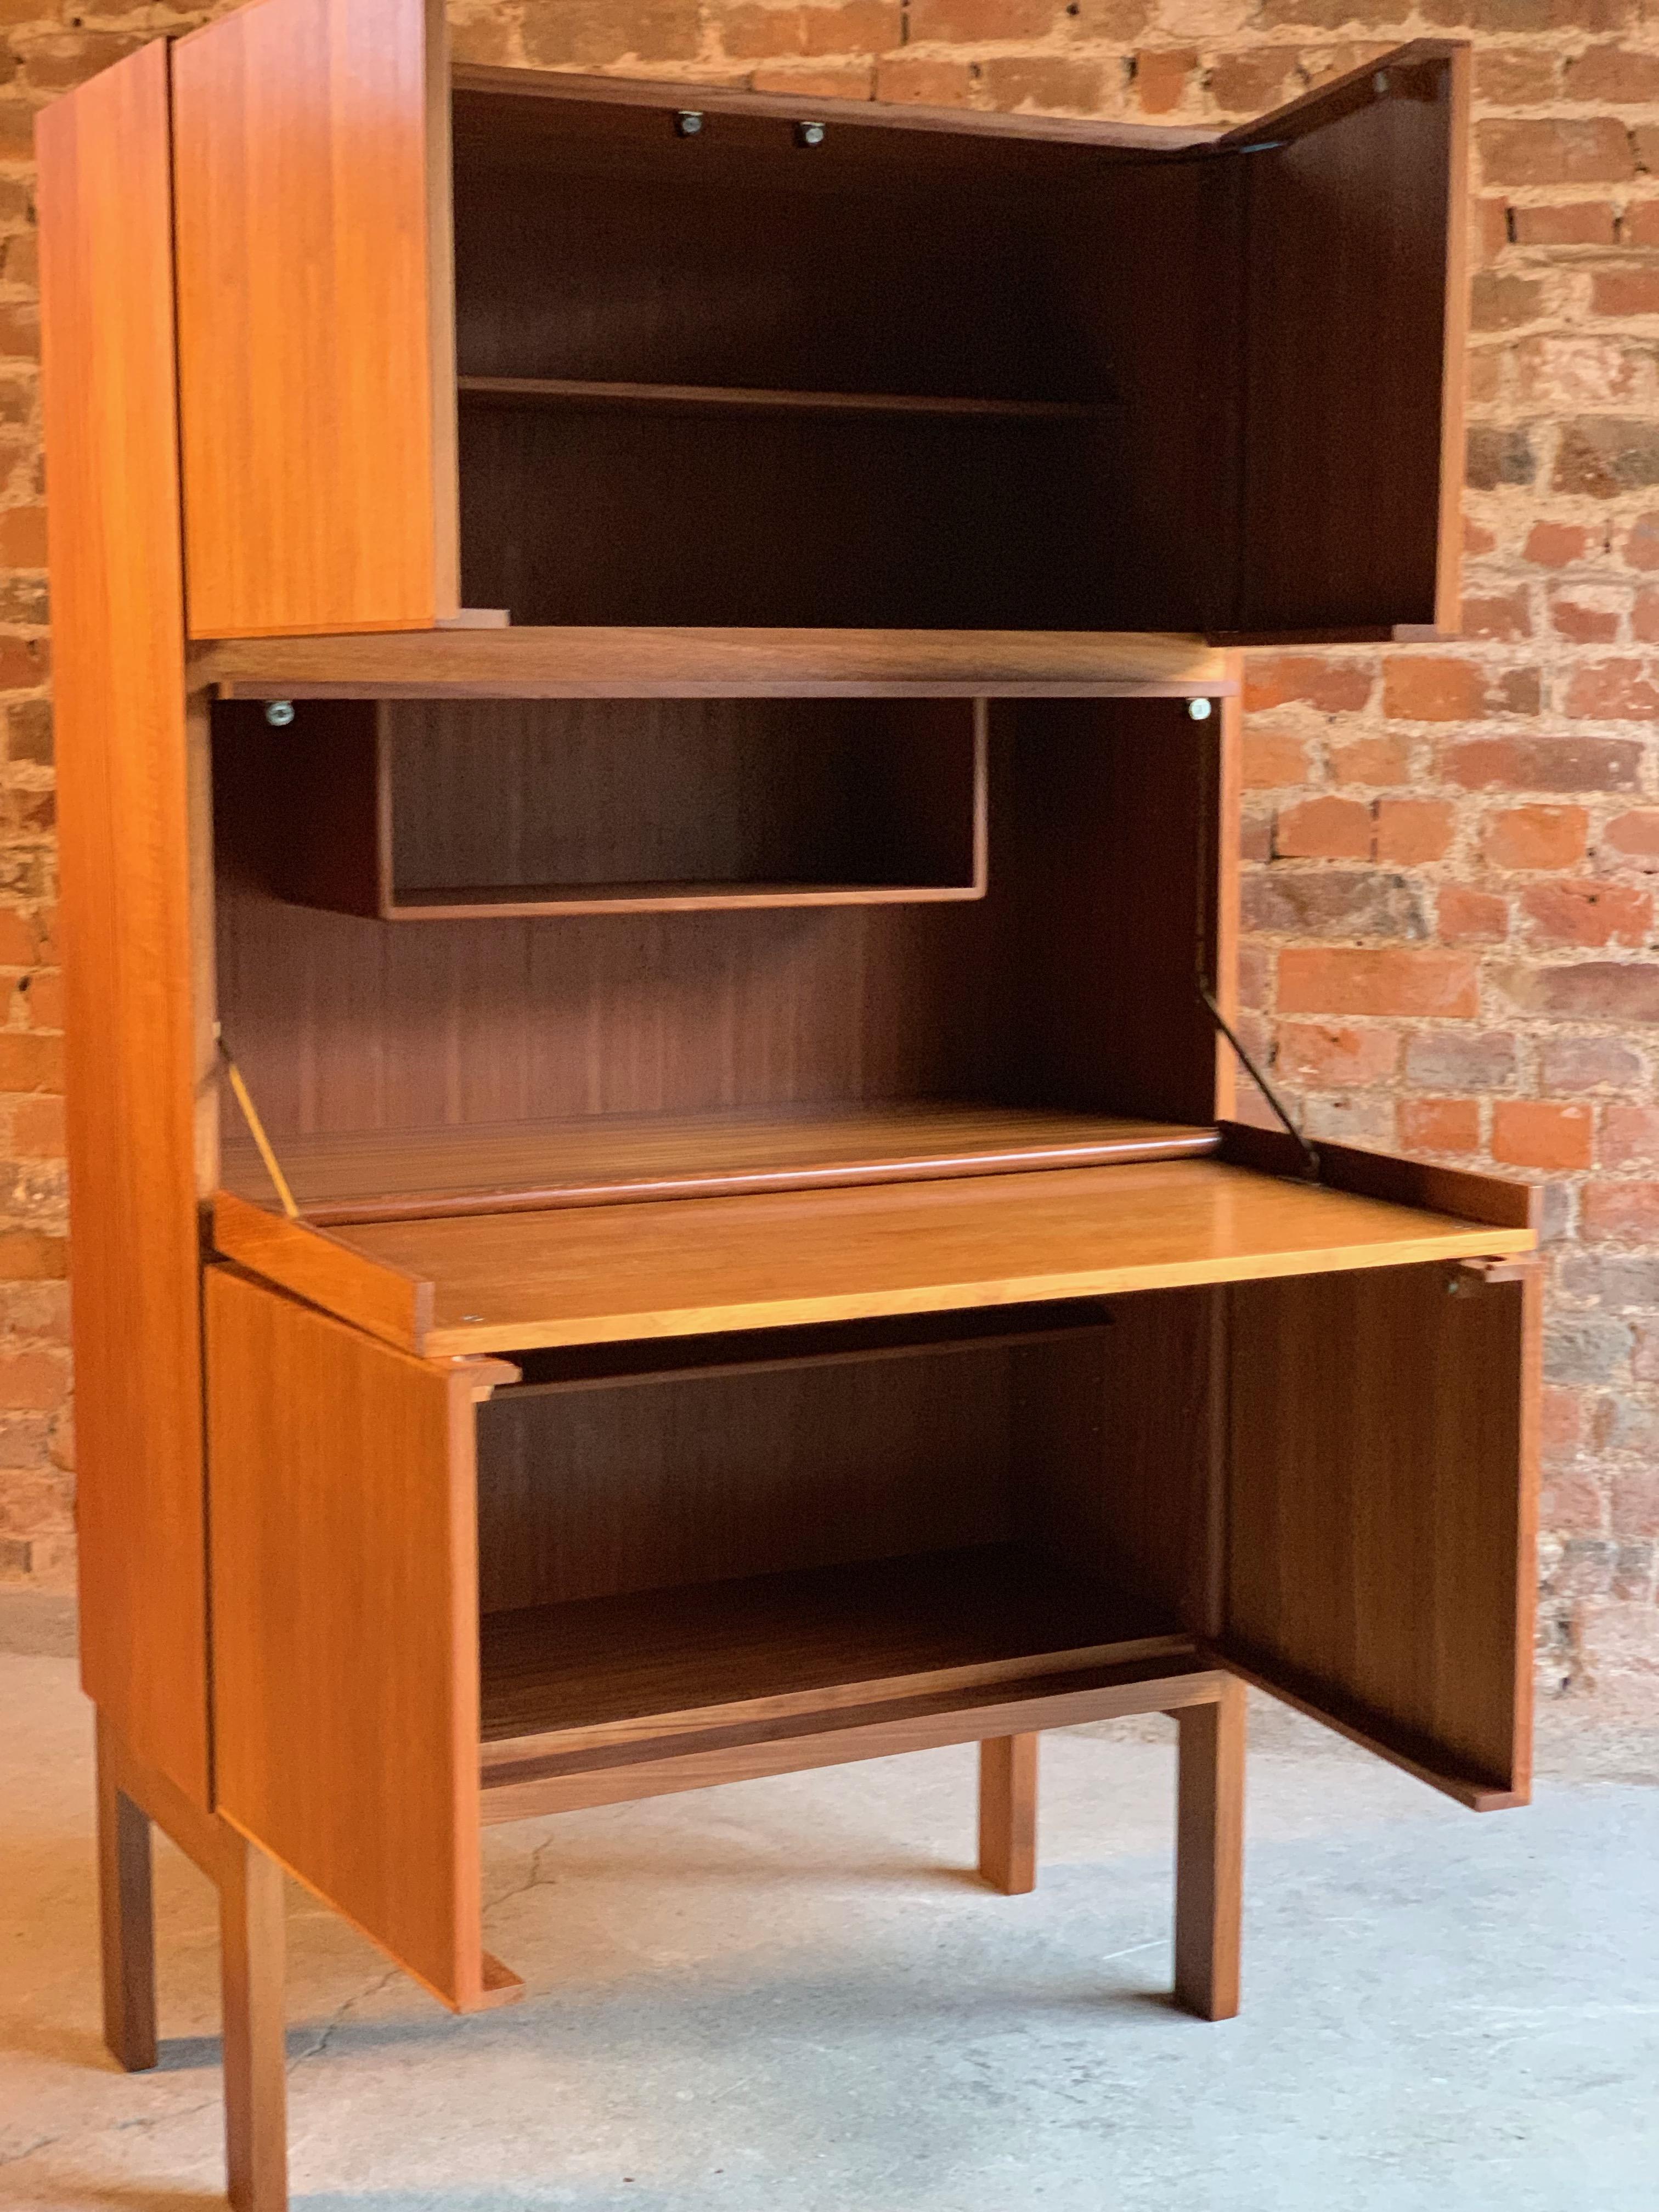 Rare Robert Heritage for Gordon Russell GR69 teak drinks cabinet, circa 1969

A fabulous and extremely rare design GR69 by Robert Heritage for Gordon Russell of Broadway, this solid teak cabinet was designed in 1969 as part of the GR69 range of